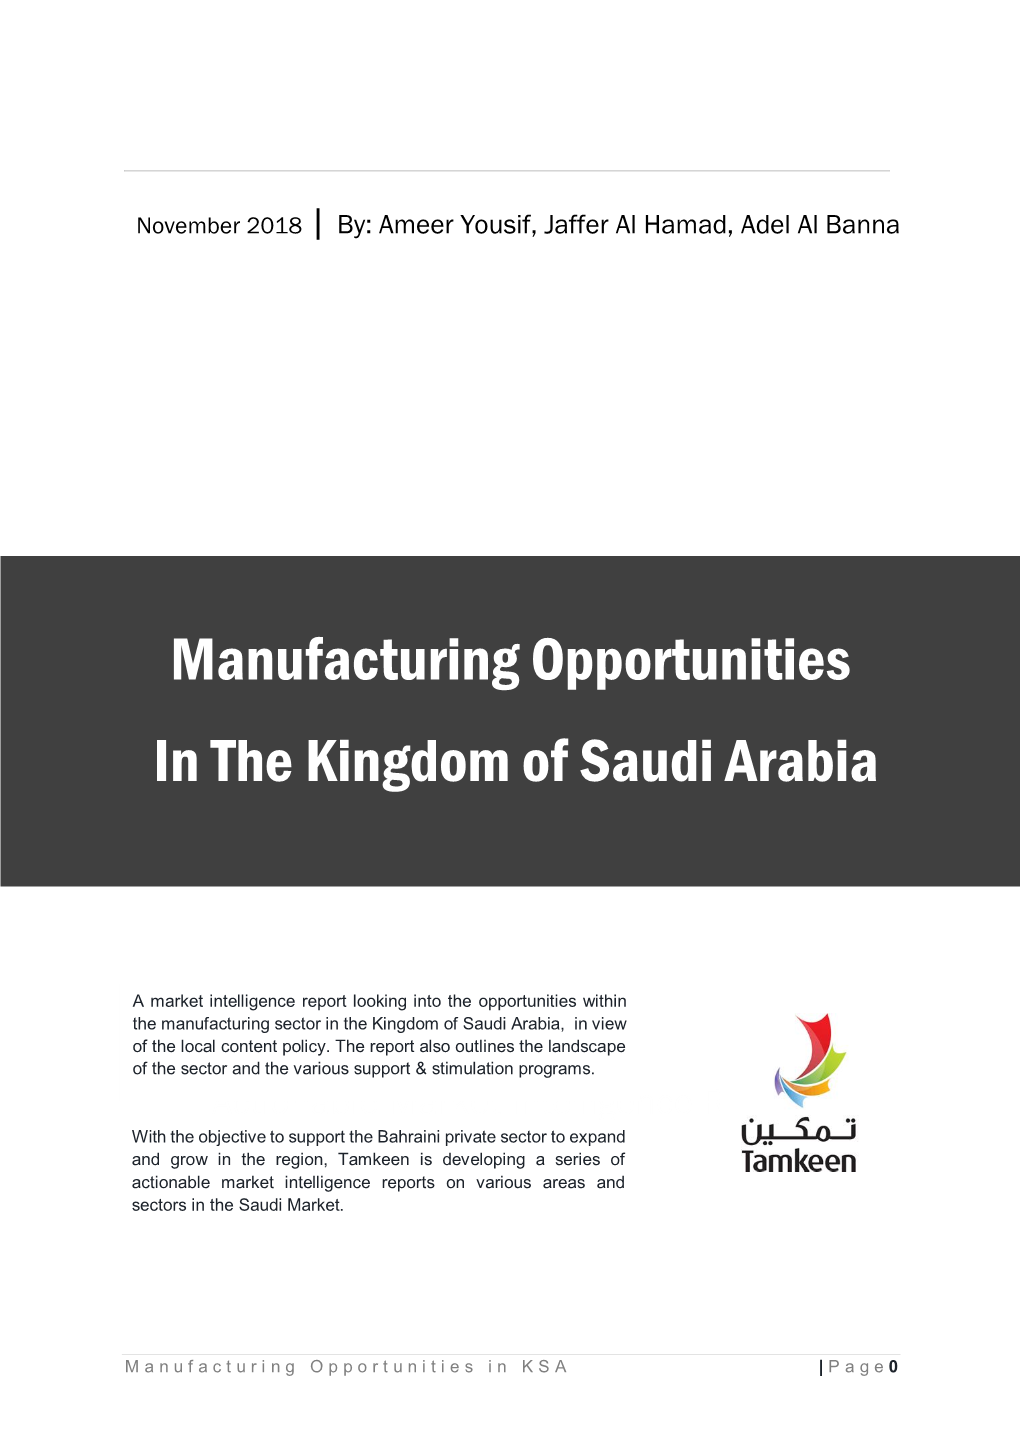 Manufacturing Opportunities in the Kingdom of Saudi Arabia